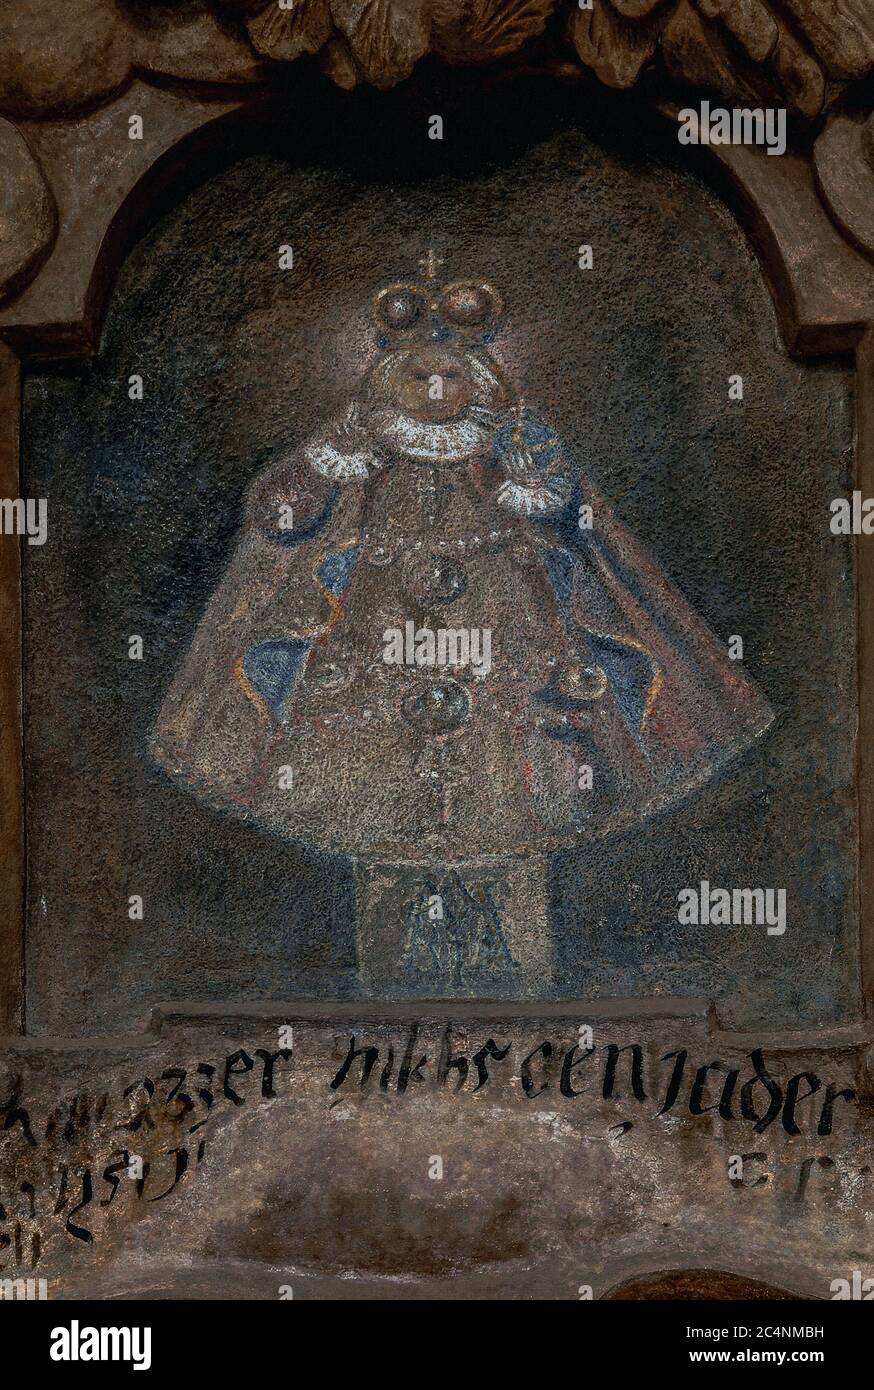 Faded painting of a 16th century wooden statue of Child Jesus, dressed in fine costume and with imperial regalia, known as the Infant of Prague.  Traditional house sign above a 1664 portal to an historic property, At The Blue Fox, now the Estonian Embassy, in Prague, Czech Republic or Czechia. Stock Photo